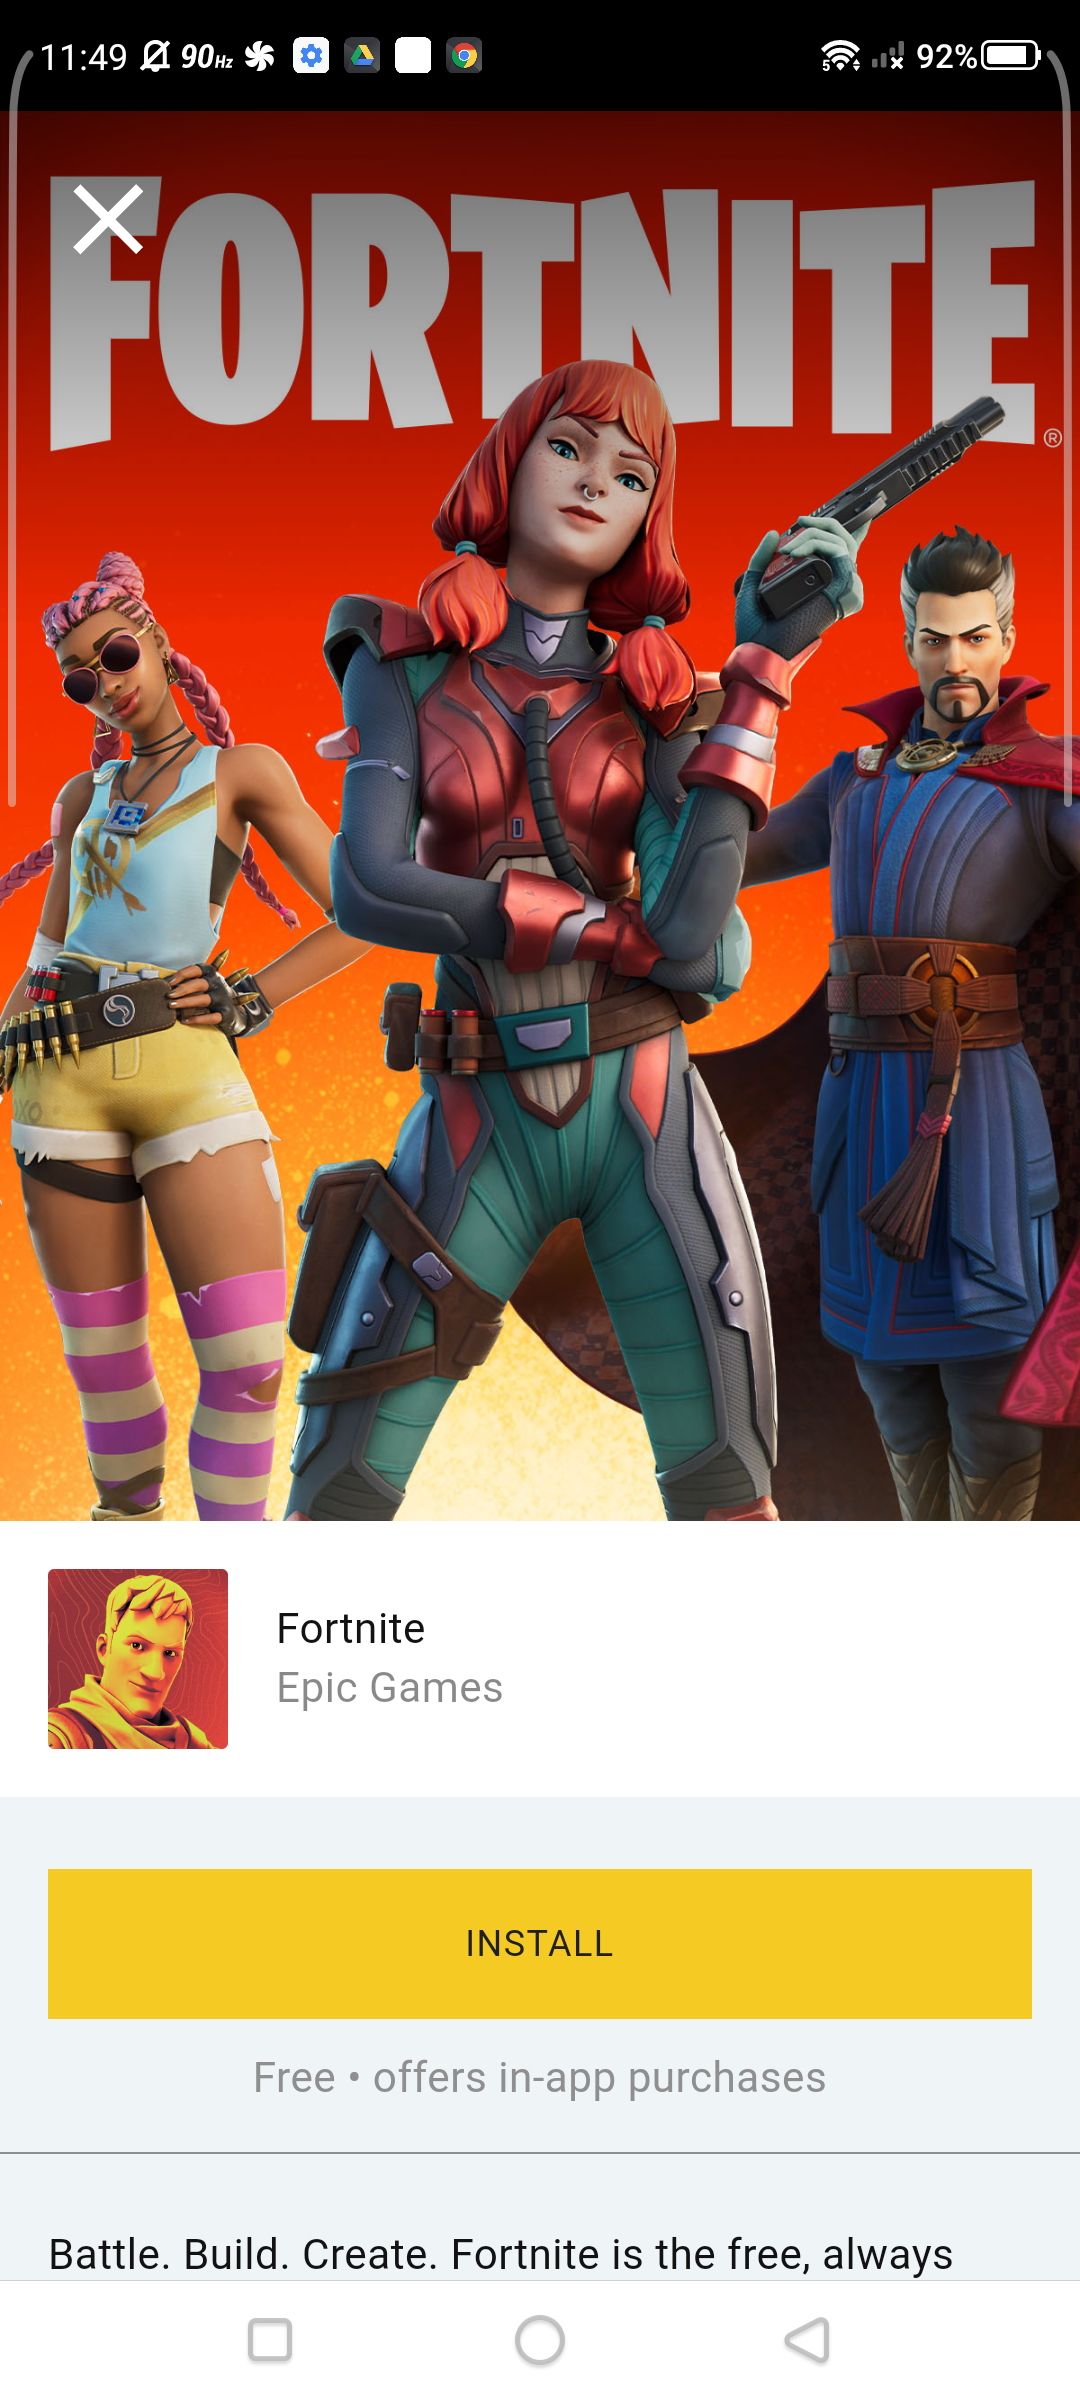 Fortnite install page on the Epic Games app